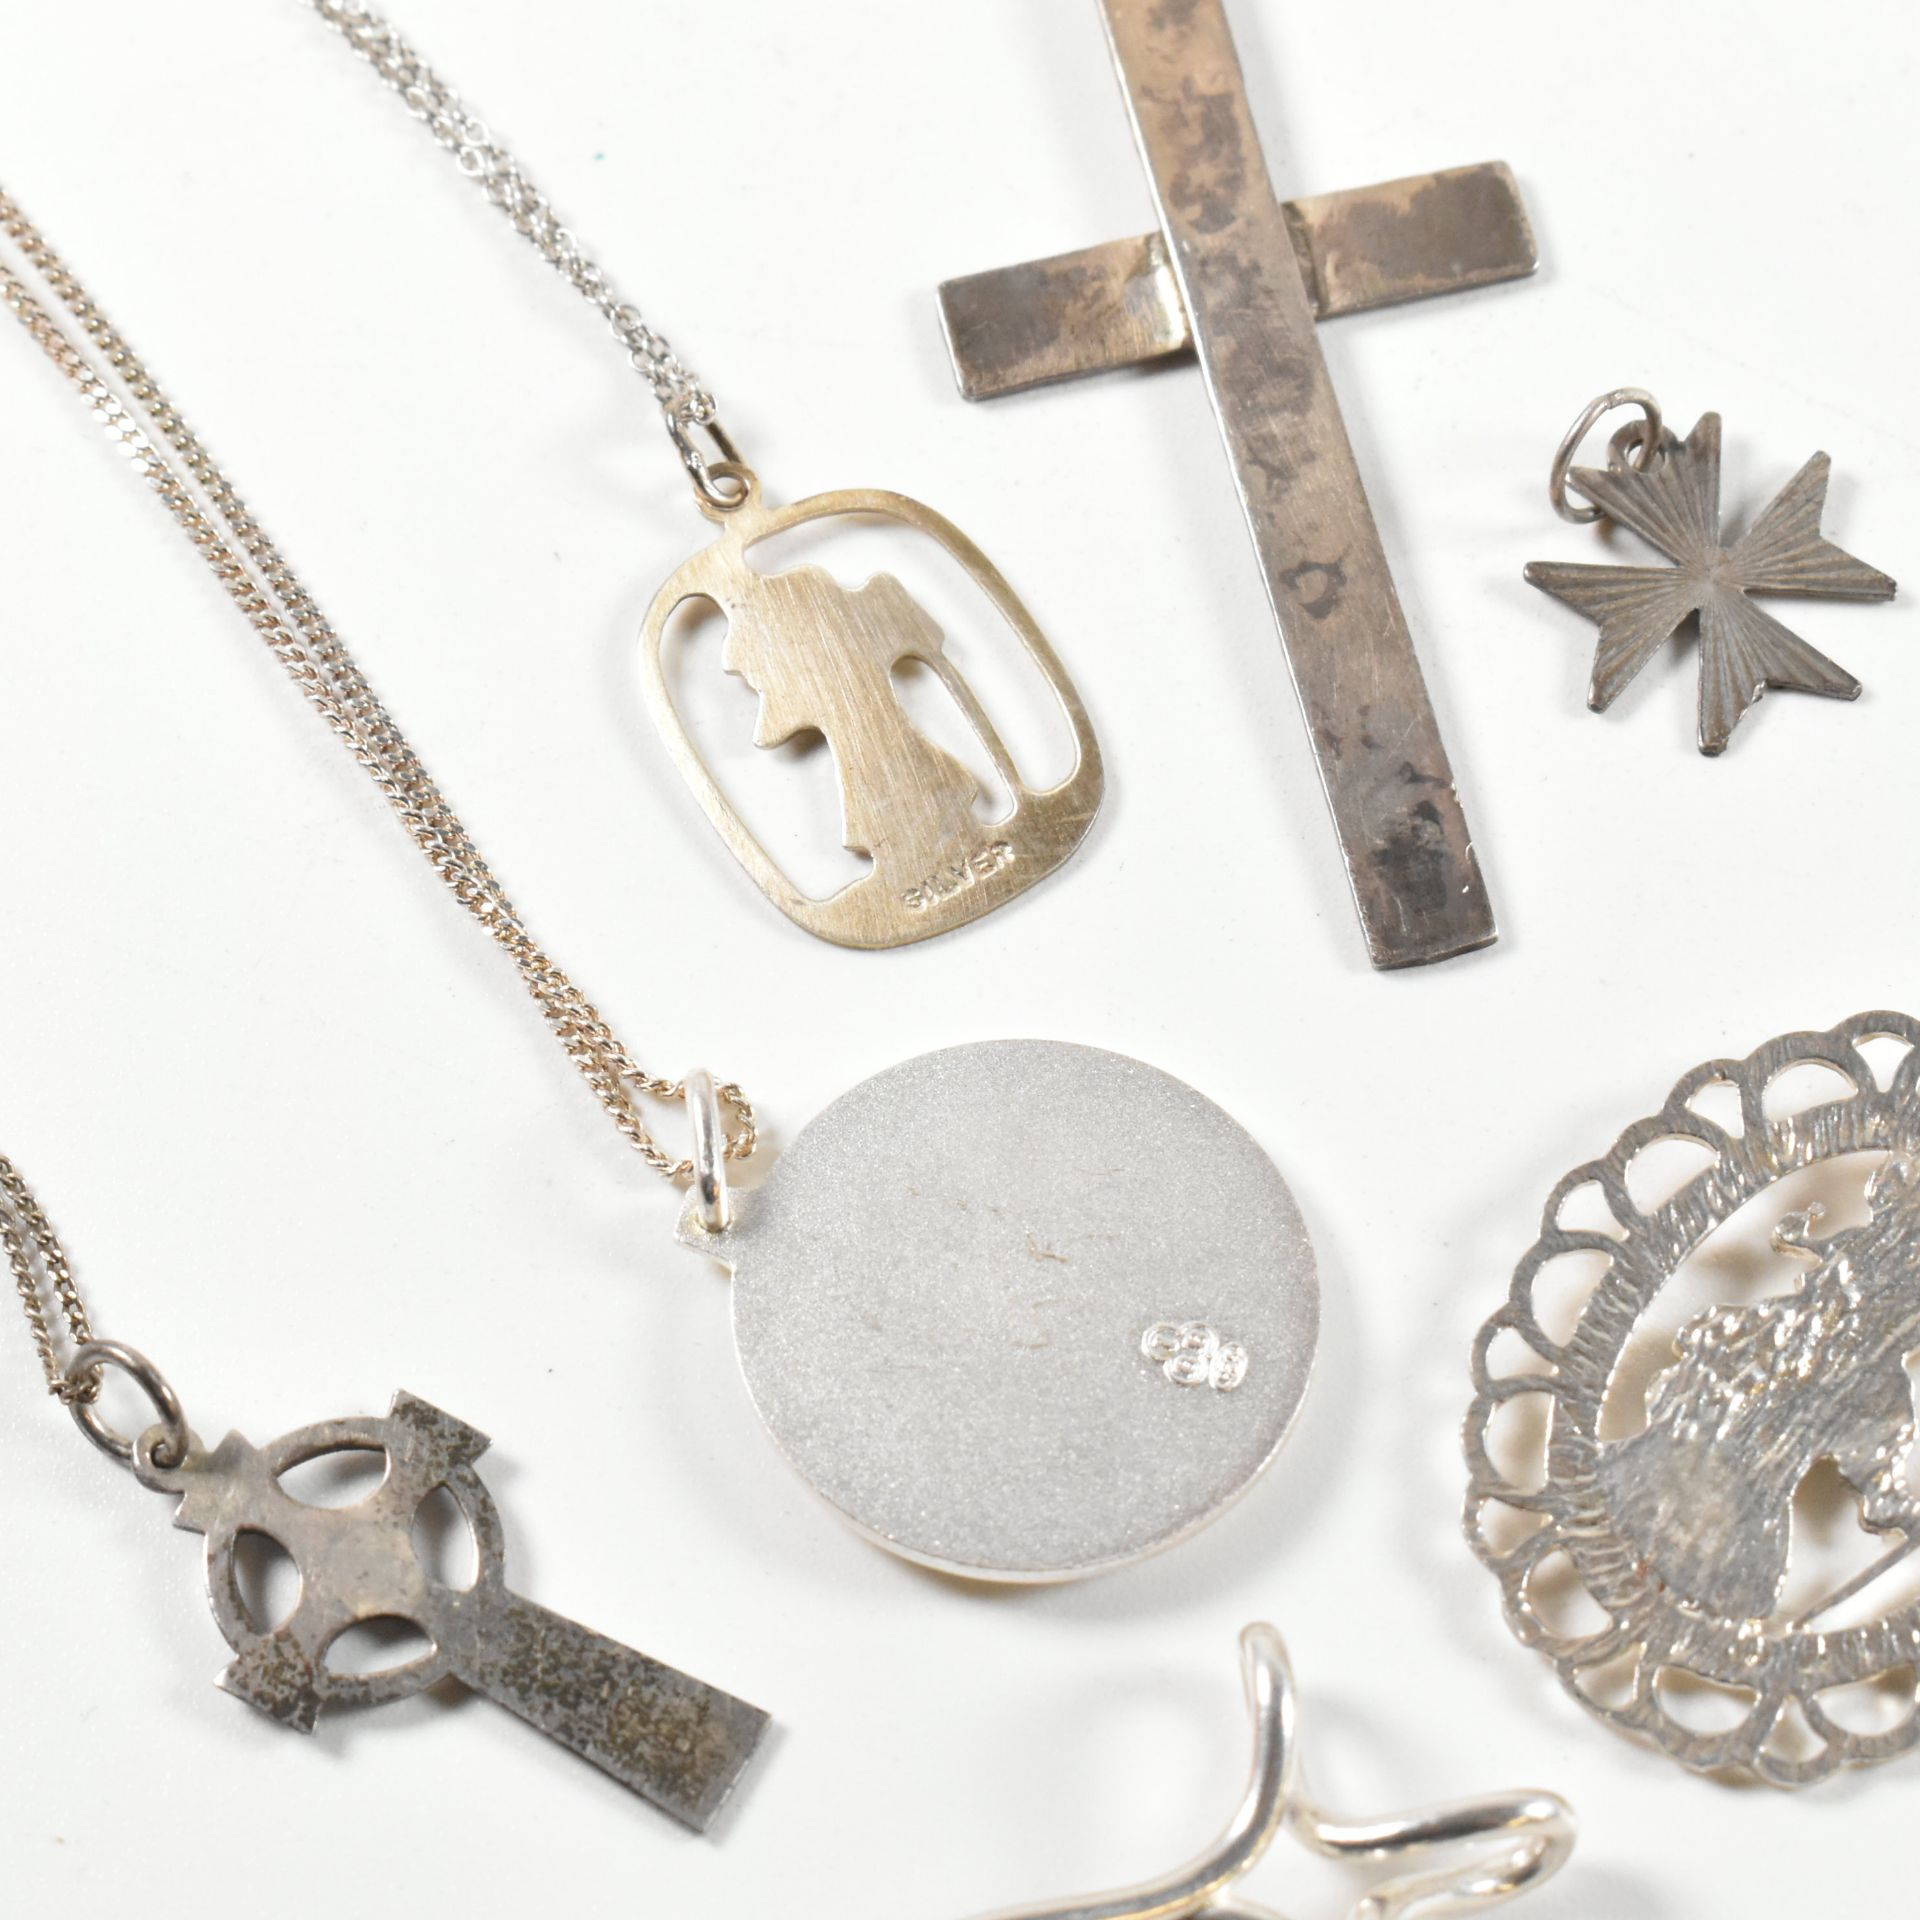 COLLECTION OF SILVER RELIGIOUS PENDANT NECKLACES & NECKLACE PENDANTS - Image 5 of 6